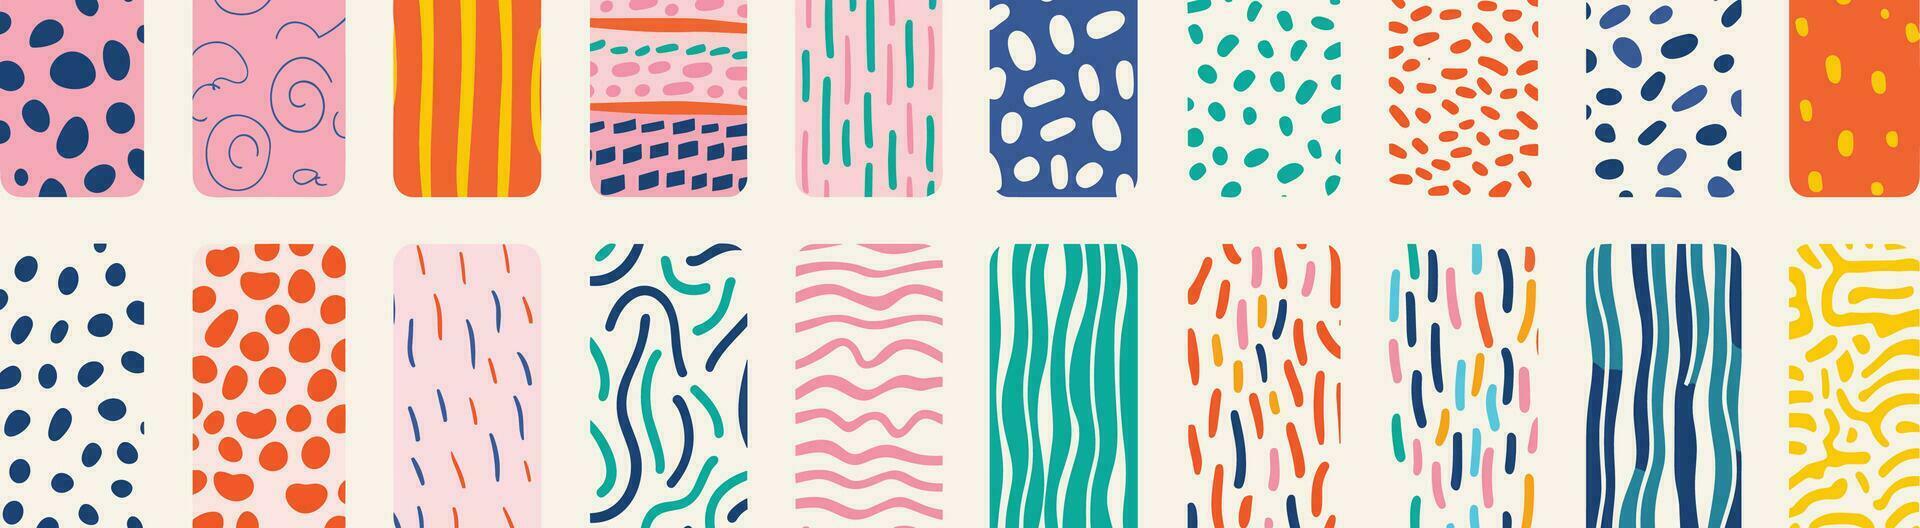 Colorful Line Doodle. A Creative Abstract Art Background Collection Suitable for Children or Festive Celebration Designs. This Bundle Offers a Simple, Childish Scribble Wallpaper vector